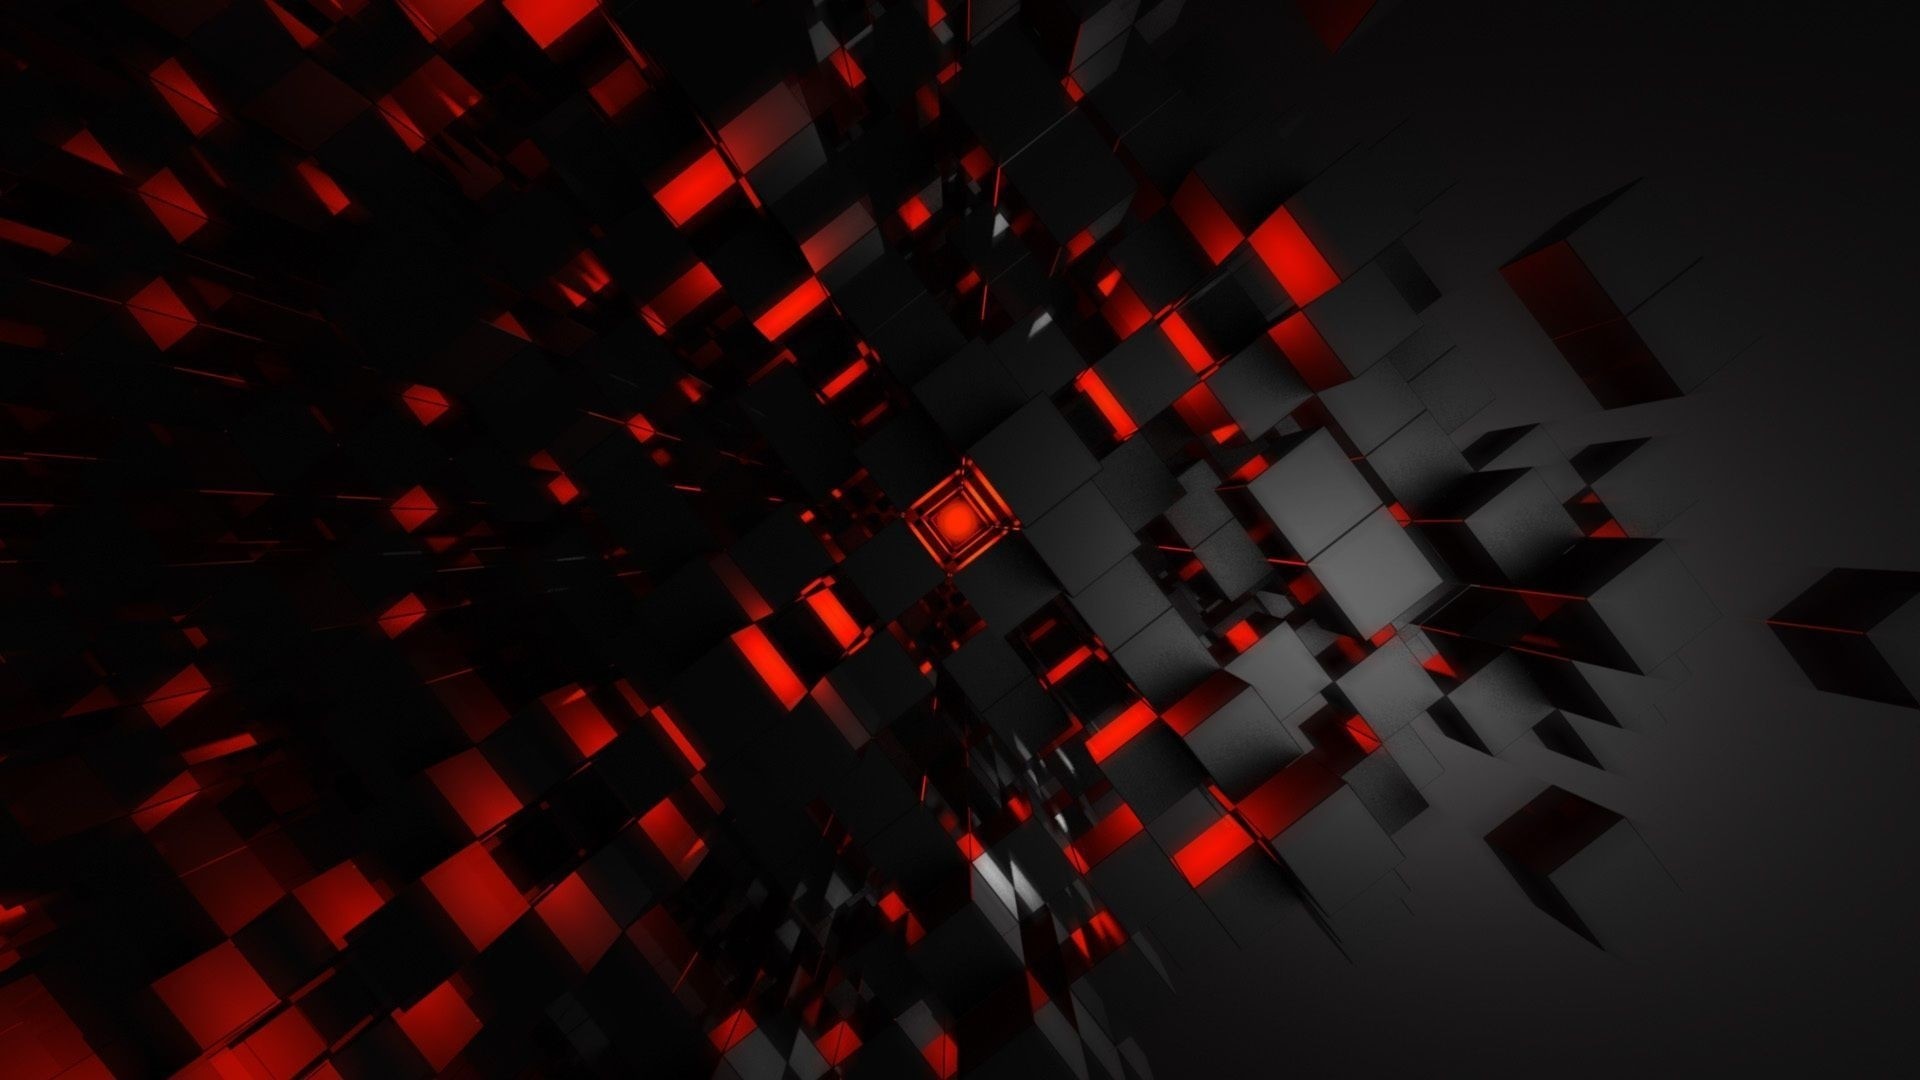 1920x1080 Title : black and red wallpapers hd – wallpaper cave | epic car wallpapers.  Dimension : 1920 x 1080. File Type : JPG/JPEG